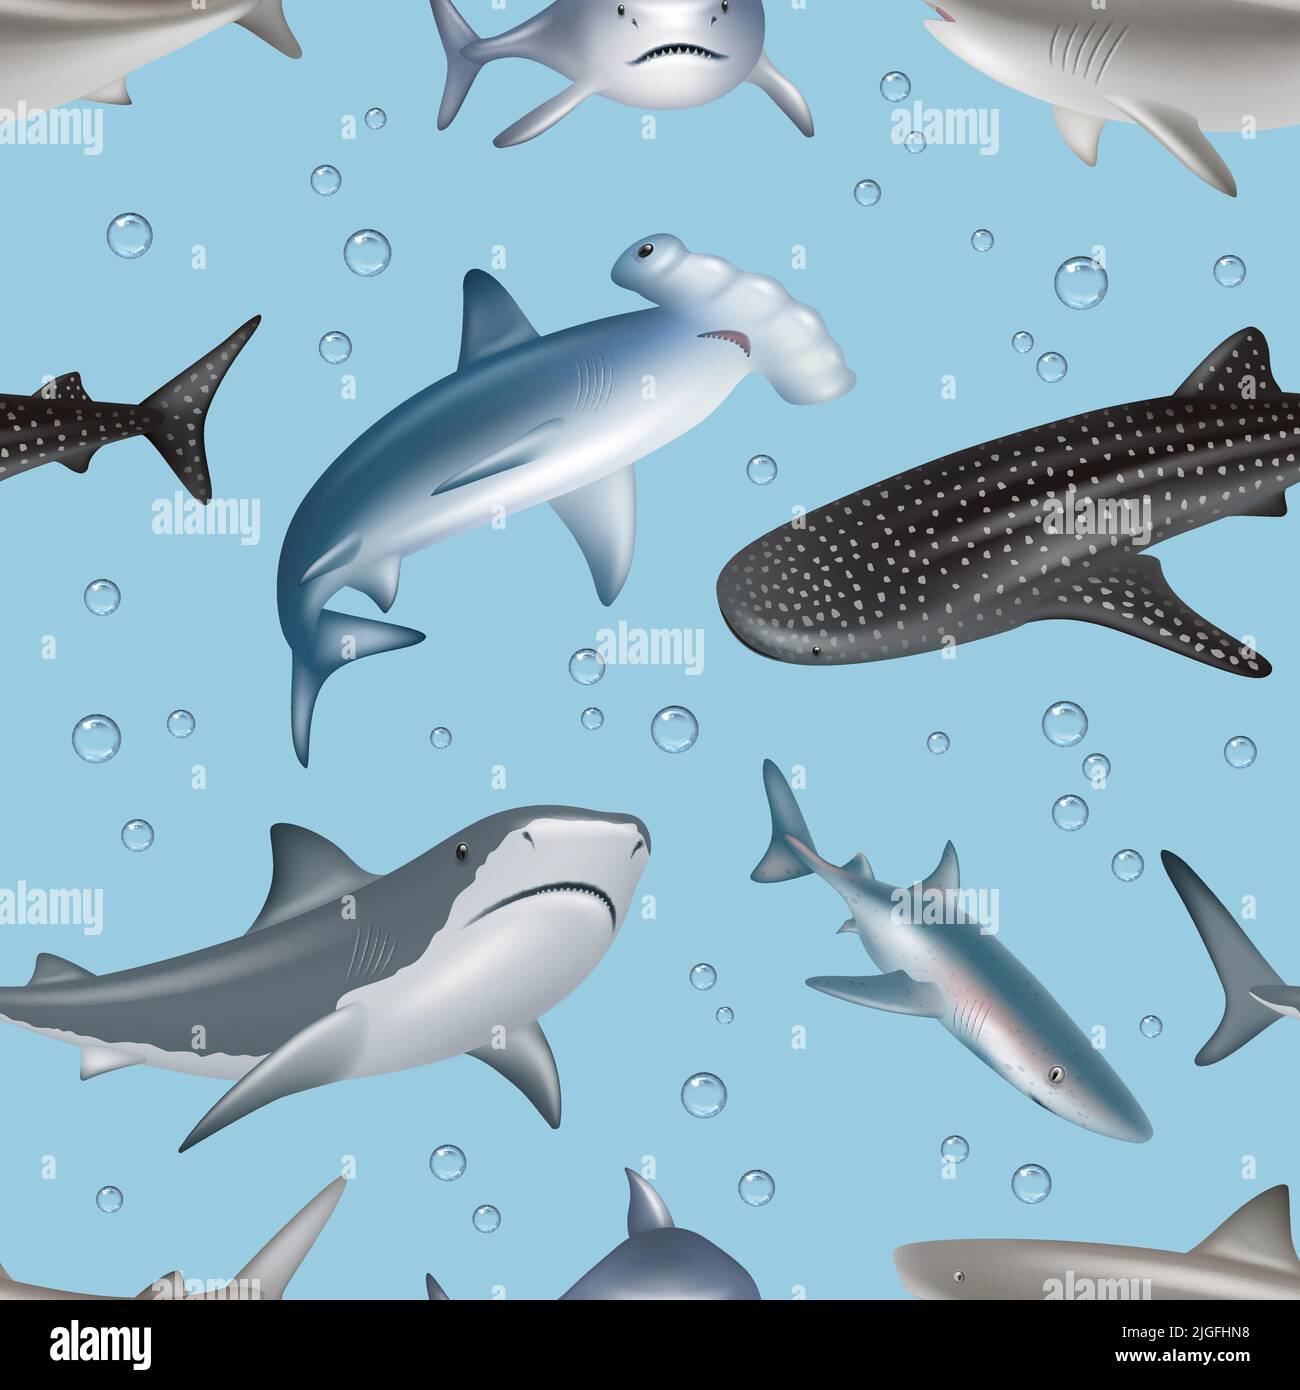 Underwater pattern. Angry wild shark swimming decent vector realistic seamless background with fishes Stock Vector